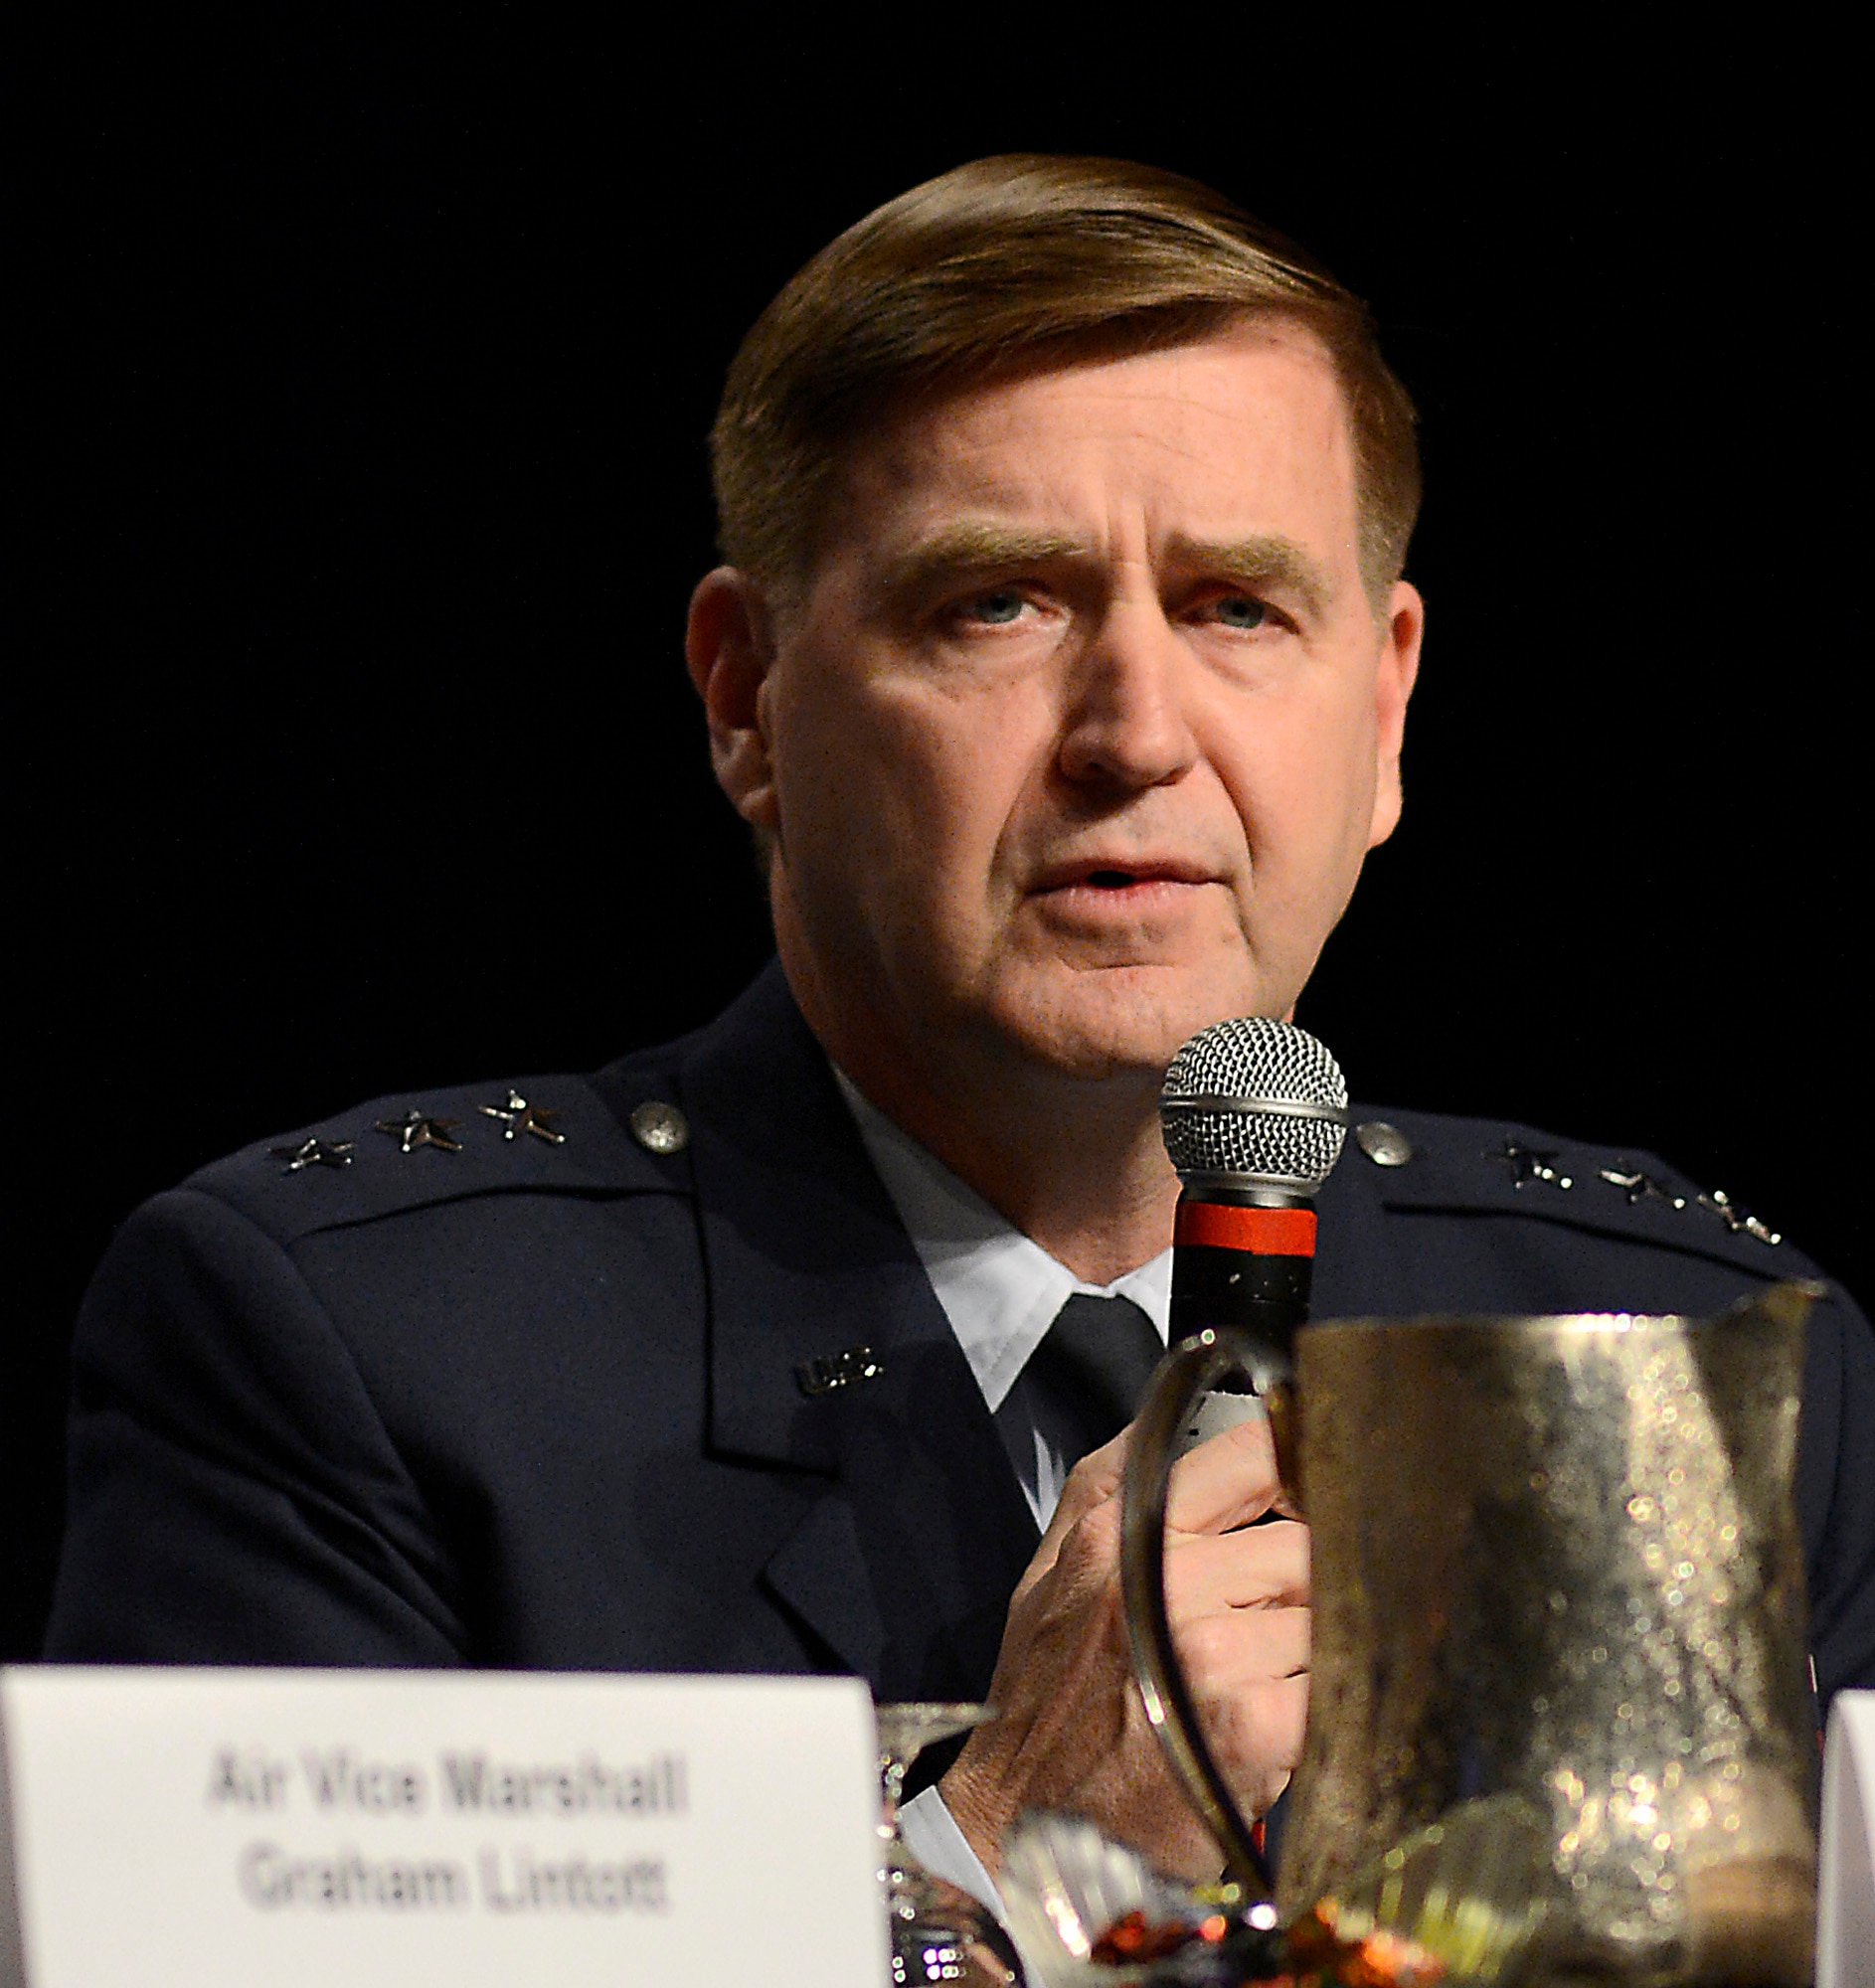 Air Force Assistant Vice Chief of Staff Lt. Gen. Stephen Hoog answers a question during the panel discussion, "Growing Partnerships," during the 30th Annual AFA Air Warfare Symposium and Technology Exposition, in Orlando, Fla., Feb. 20, 2014.  Hoog shared the panel with Deputy Assistant Secretary of the Air Force, International Affairs, Heidi Grant, German Air Attaché and Assistant Defense Attaché Col. Bernhard Altensberger, Royal Netherlands Air Force Air and Assistant Defense Attaché Col. Anton ven Drijver, New Zealand Defense Attaché Air Vice Marshall Graham Lintott and United Kingdom Air Attaché Air Commodore Kenneth McCann. (U.S. Air Force photo/Scott M. Ash)